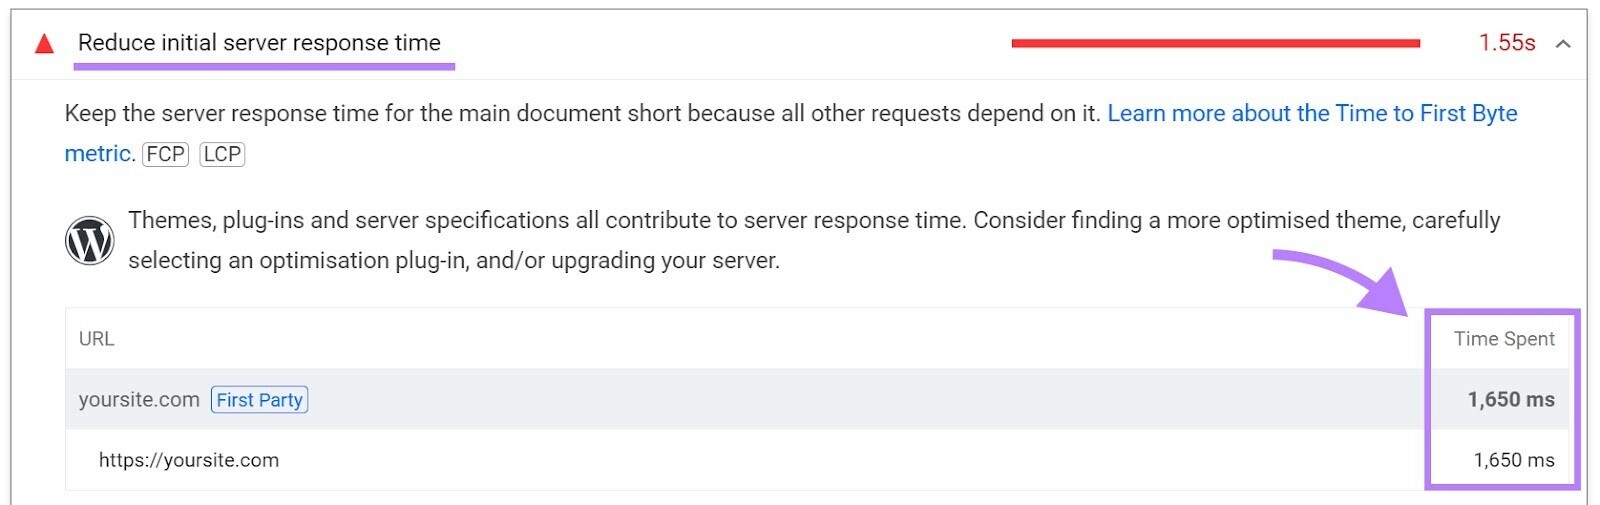 “Reduce initial server response time” page